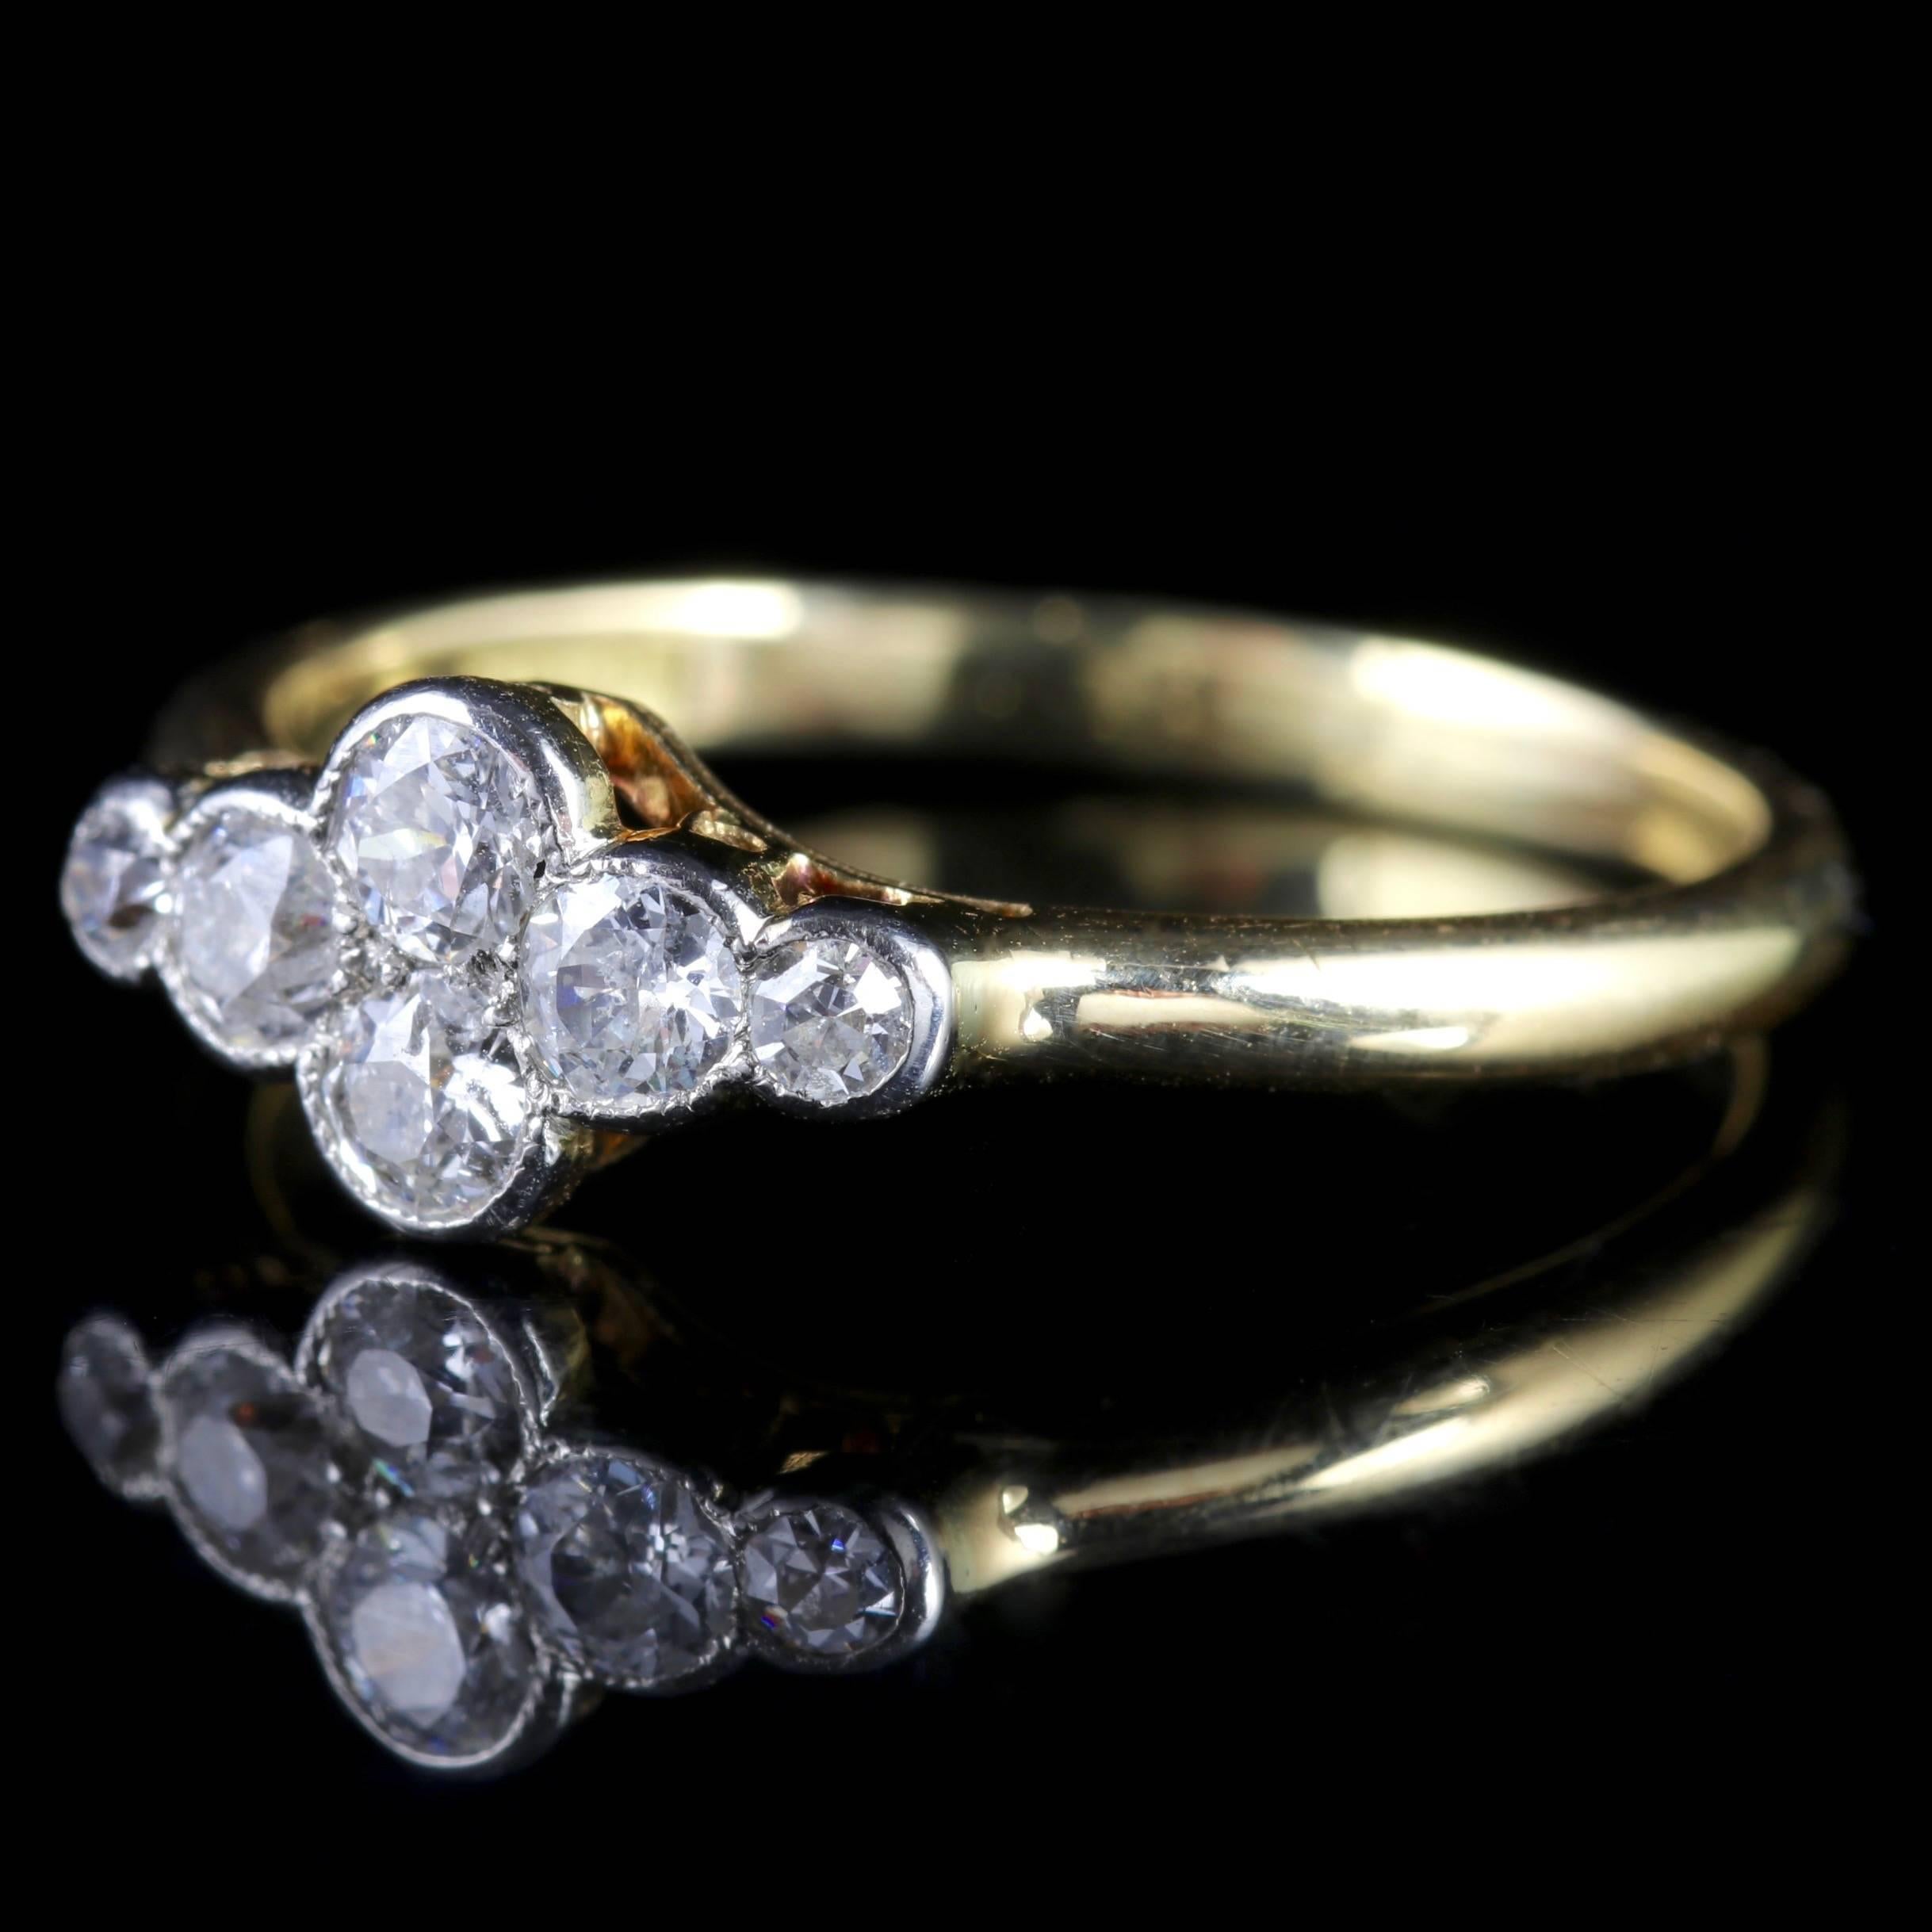 To read more please click continue reading below-

This fabulous antique 18ct Yellow Gold Diamond cluster ring is Circa 1900 - 1910.

A lovely bright white cluster of Diamonds adorns the face of this ring with approx. 0.50ct of Diamond in